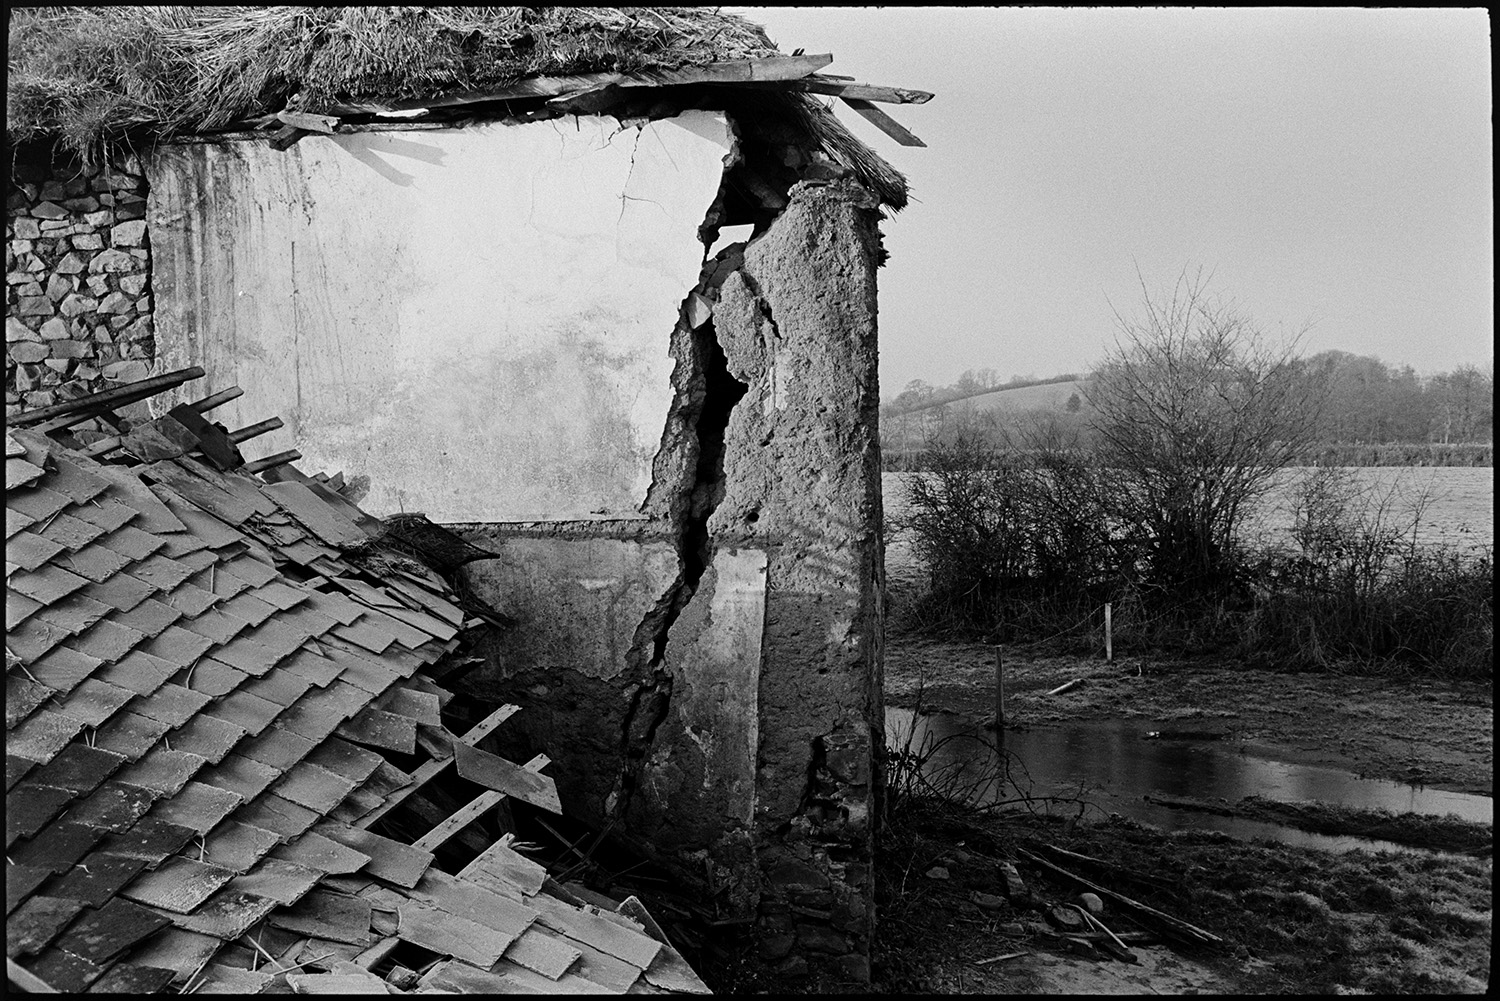 Ruined thatch and cob barns, with views from nearby stream, trees.
[A ruined cob and thatch barn at Middle Week, Iddesleigh, behind a pile of fallen slates and timbers. A large crack can be seen in the barn wall. A waterlogged field and hedges are visible in the background.]